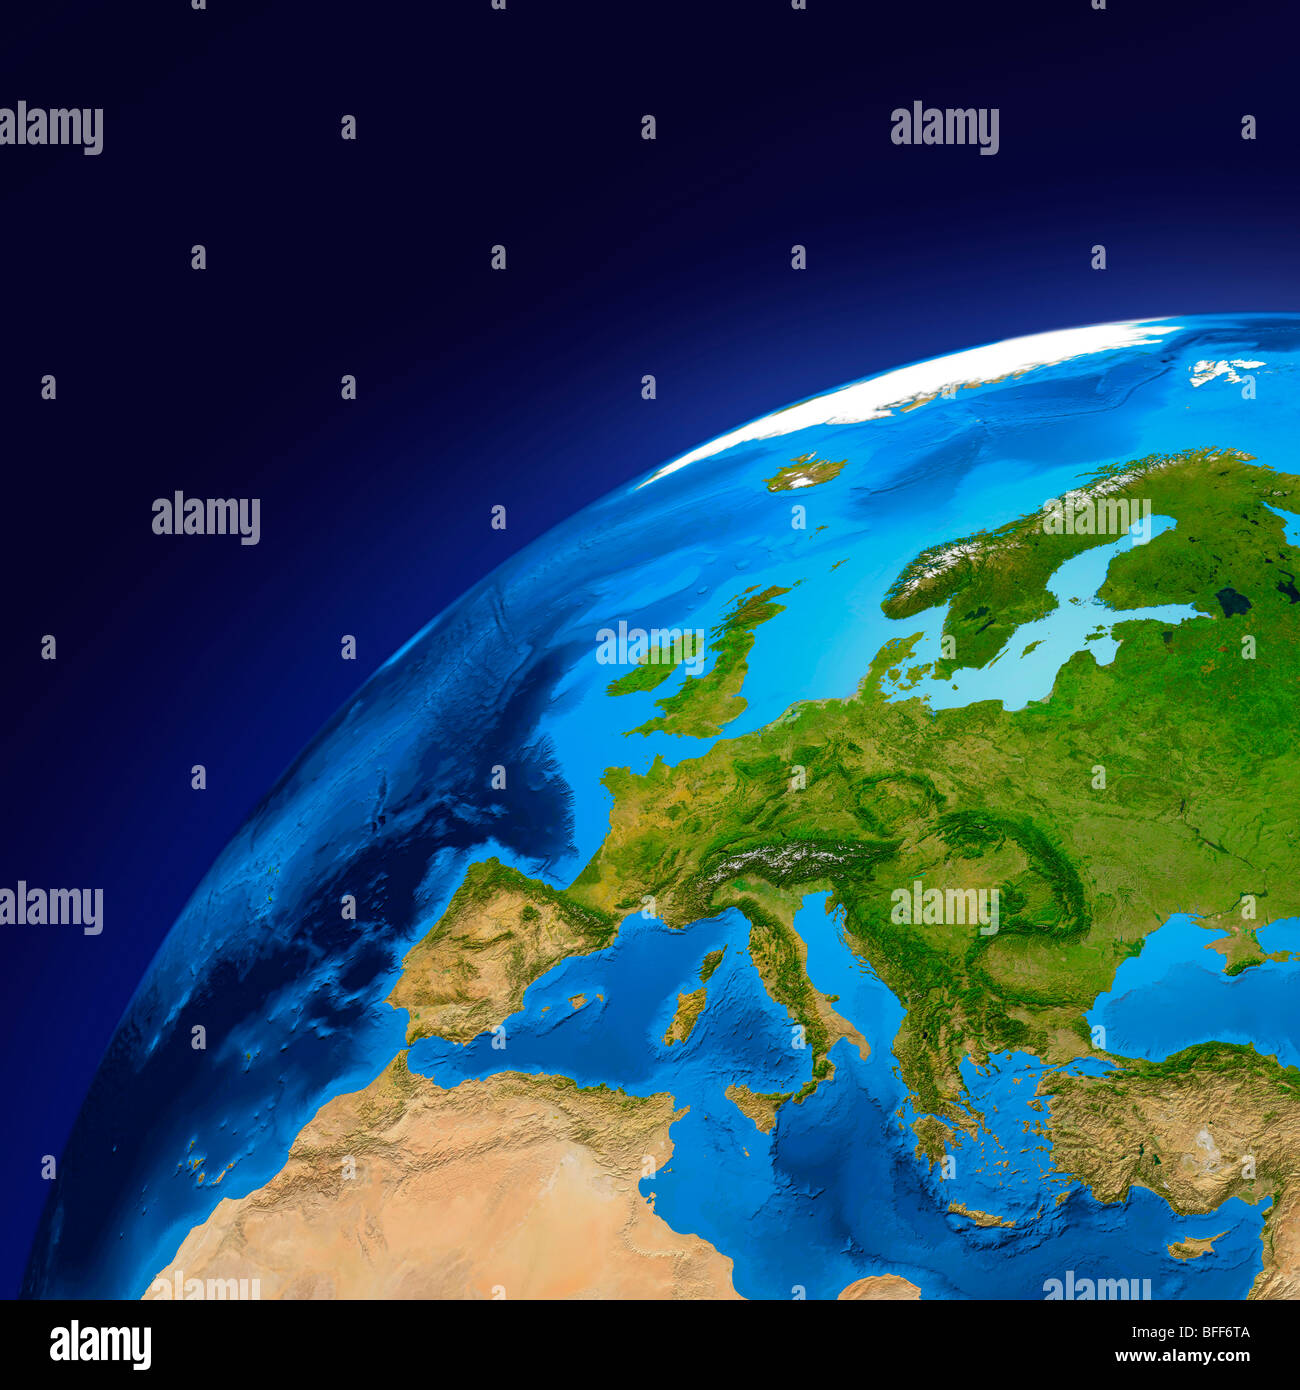 View of the Earth globe from space showing European continent Stock Photo